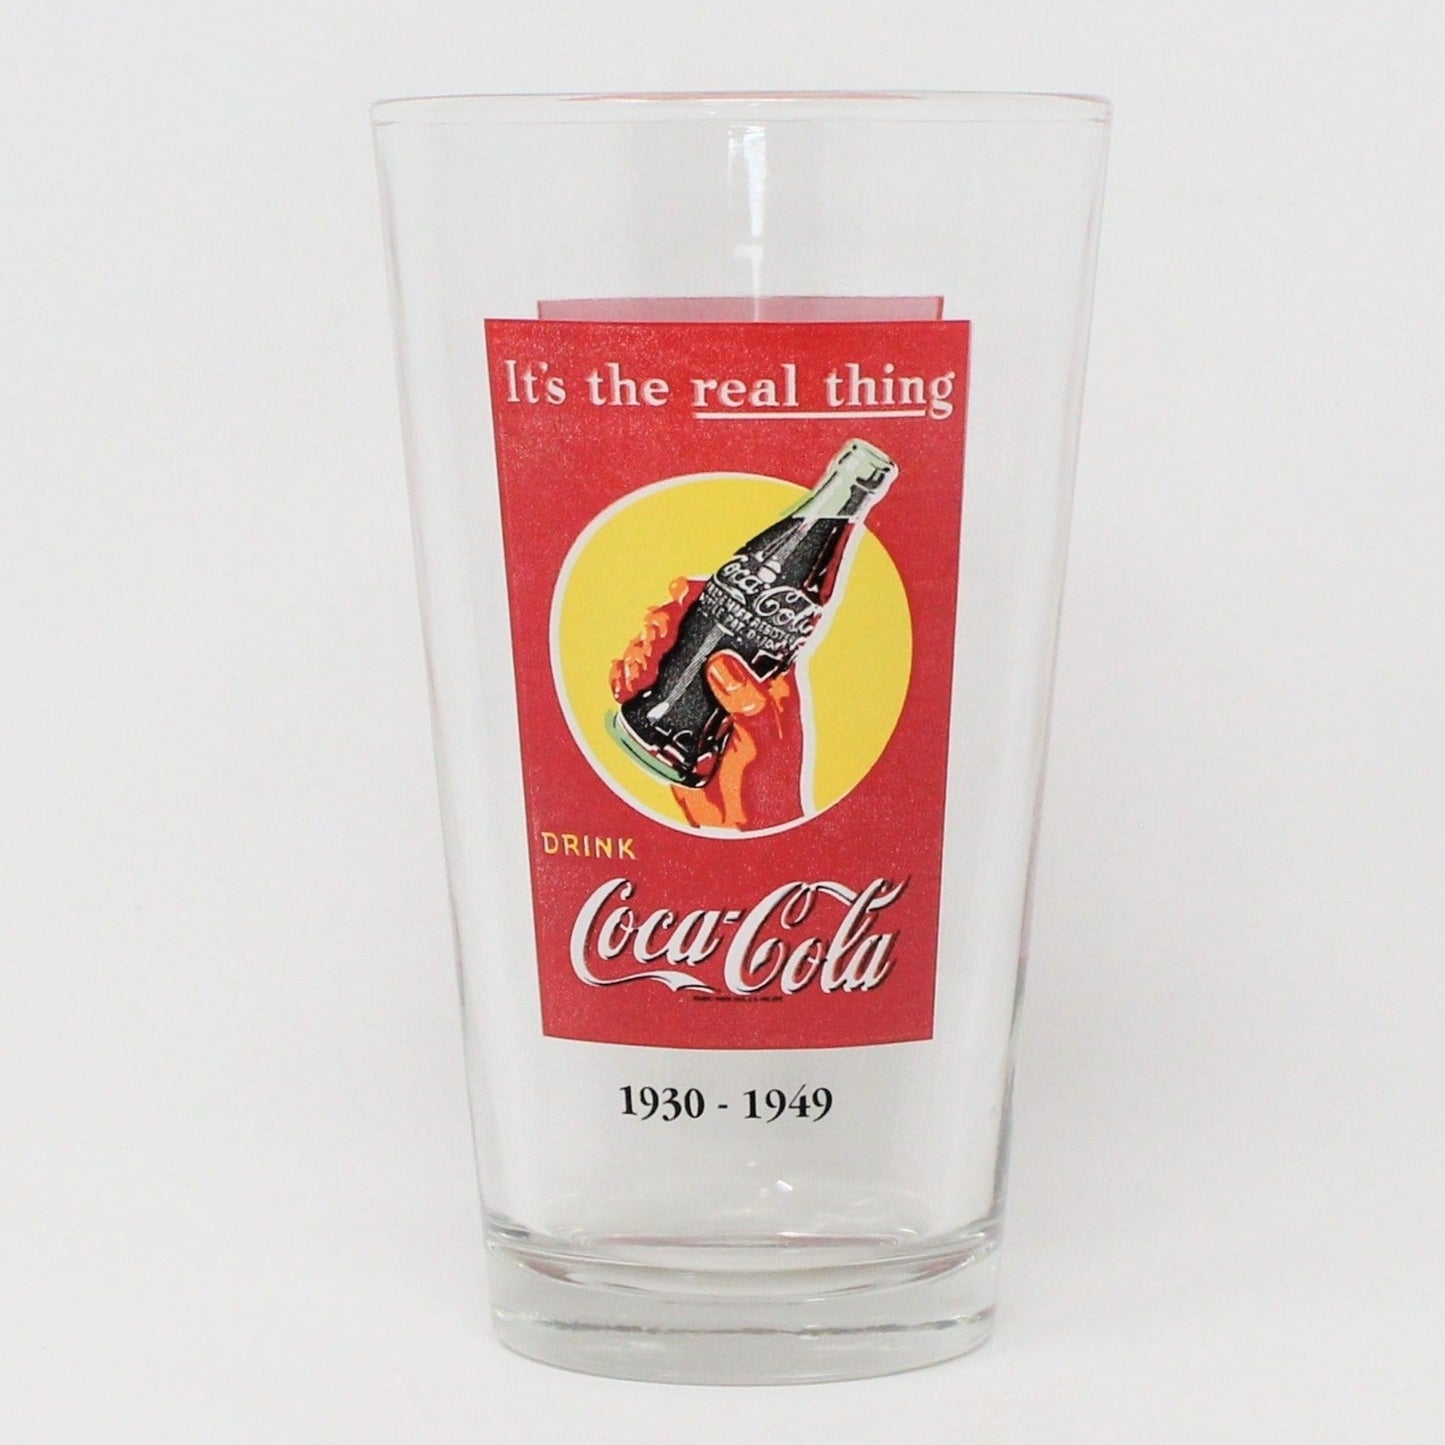 Coca Cola, Beer Glass, It's the Real Thing 1930 - 1949 Advertisement, Vintage